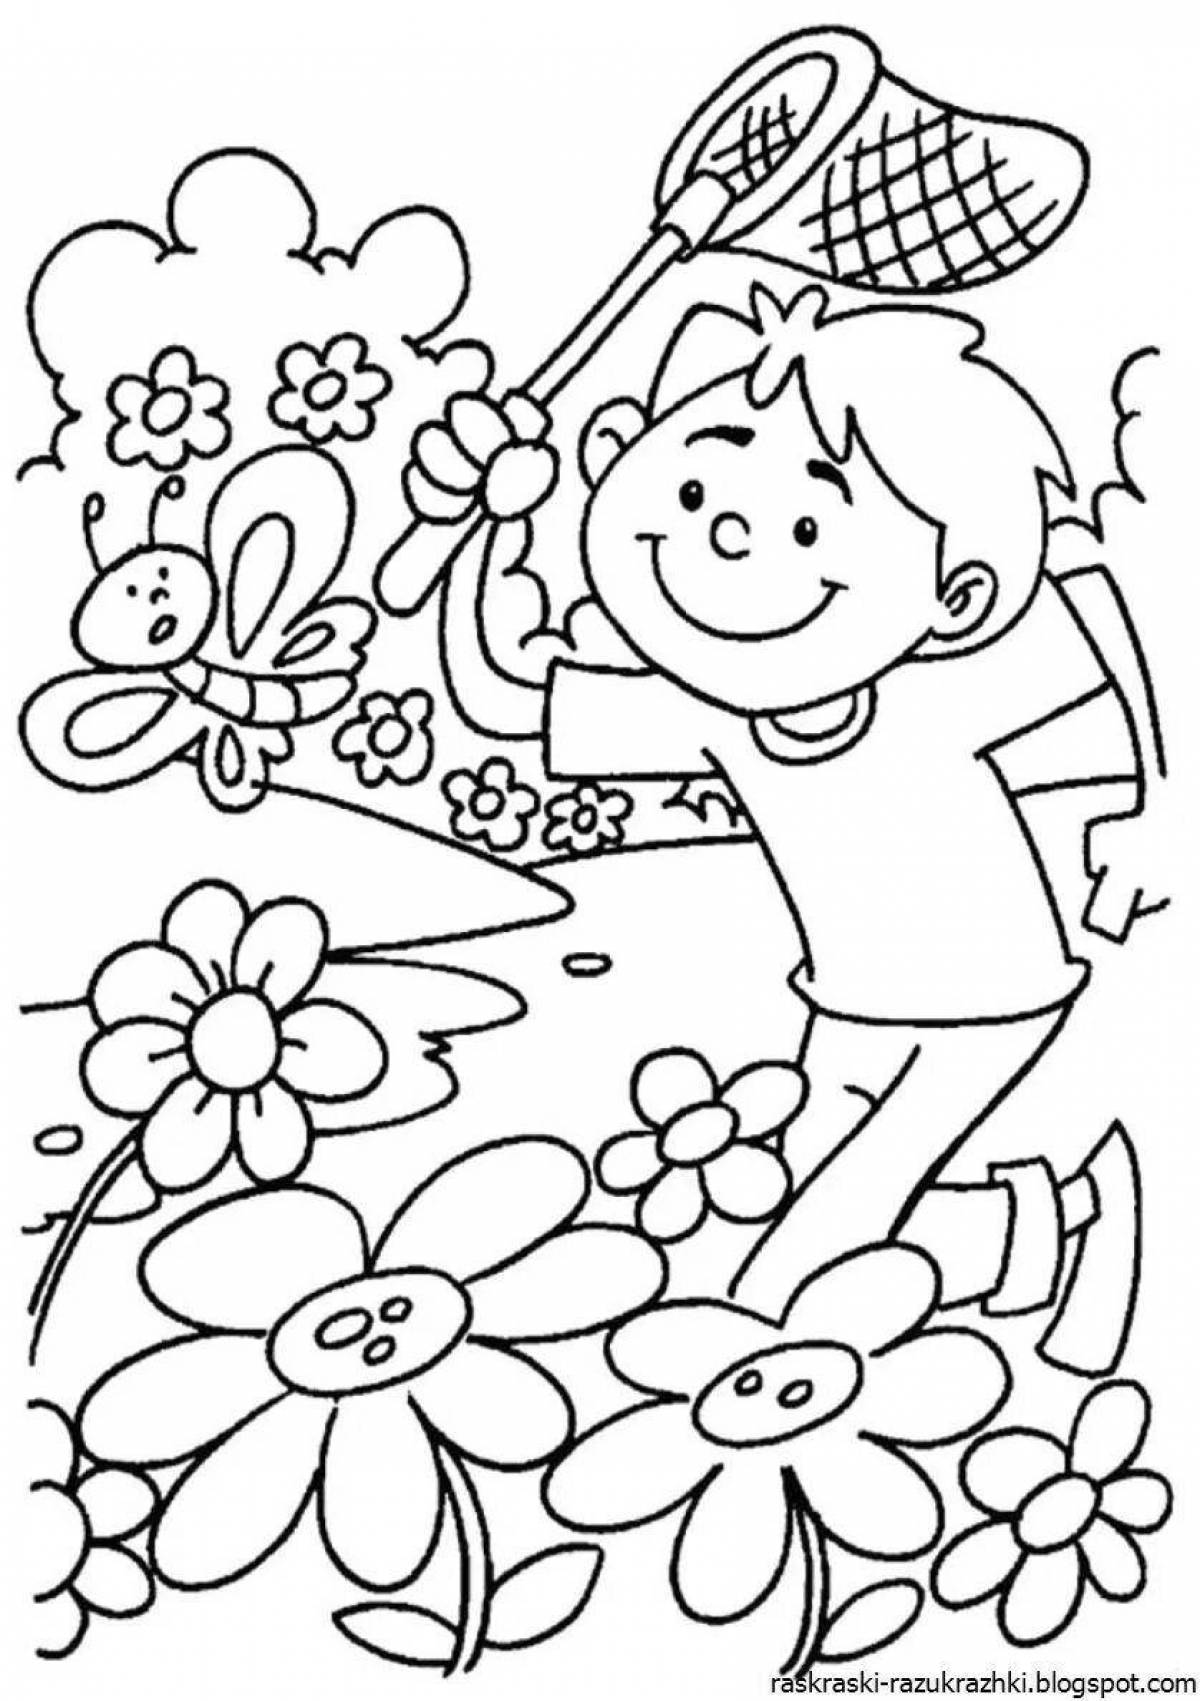 Inviting summer coloring book